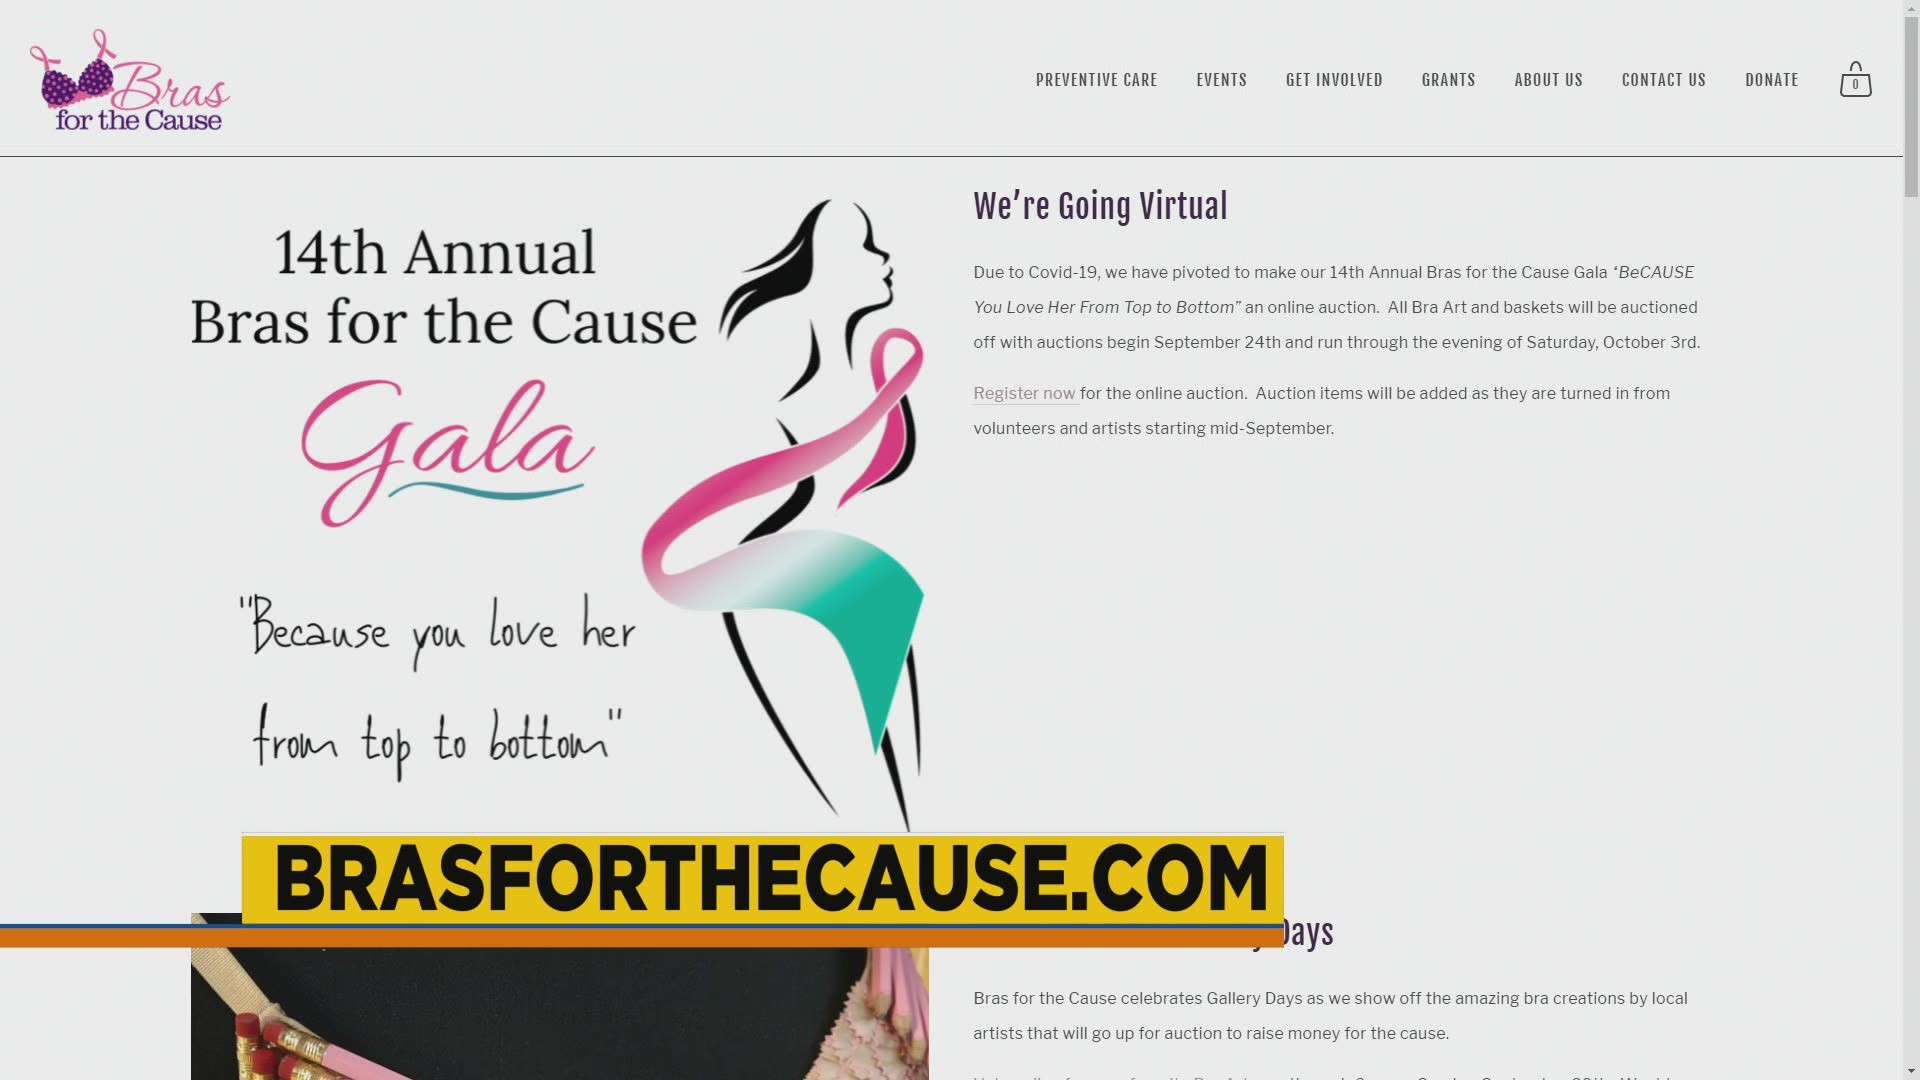 You can register for the online gala auction at BrasForTheCause.com